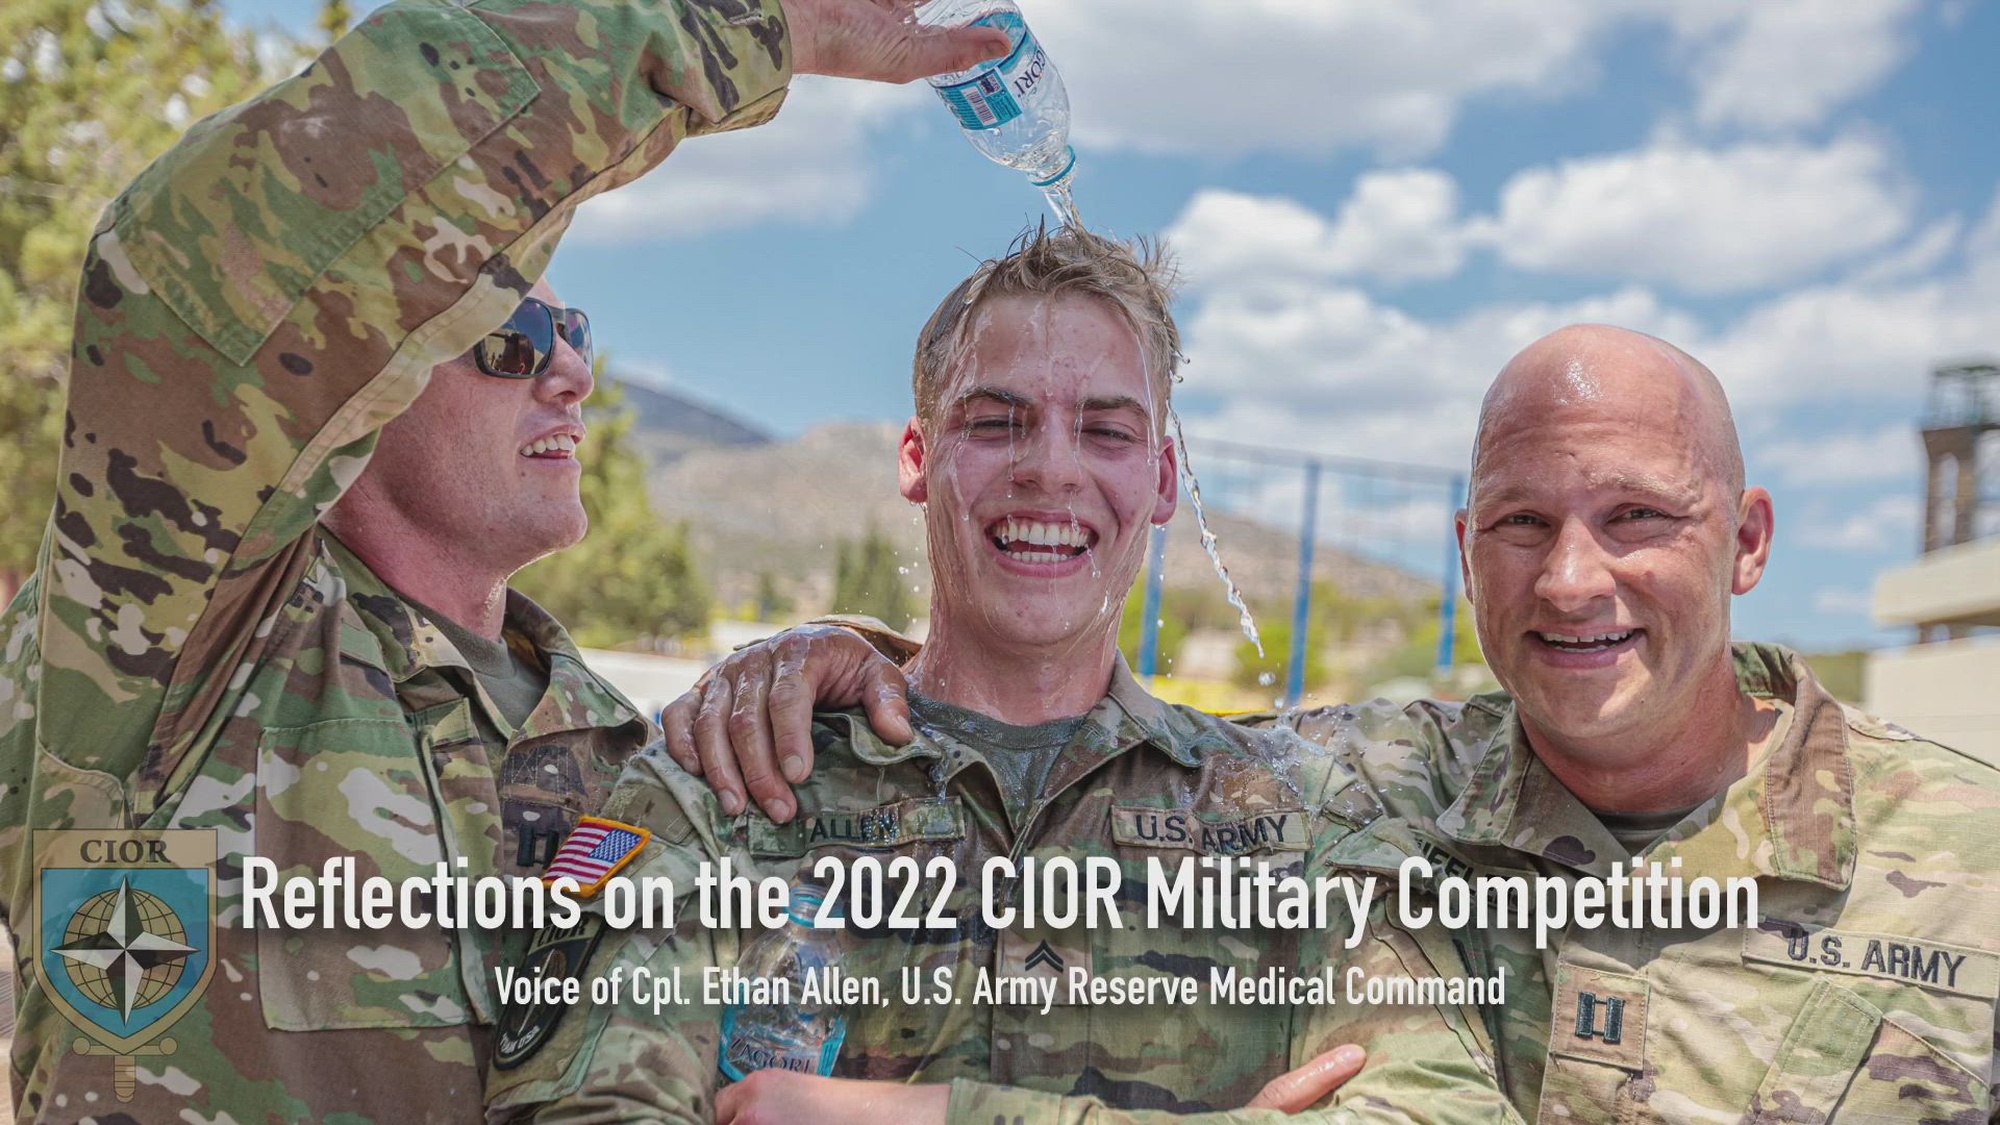 Cpl. Ethan Allen, U.S. Army Reserve Medical Command, reflects on his experience during the Interallied Confederation of Reserve Officers Military Competition (CIOR MILCOMP). This competition is an annual reserve military competition with NATO member states and other participating nations with 34 countries in total, representing 1.3 million reservists. The MILCOMP, which has been held since 1957, is a military pentathlon testing service members in pistol and rifle marksmanship, land and water obstacles and orienteering.